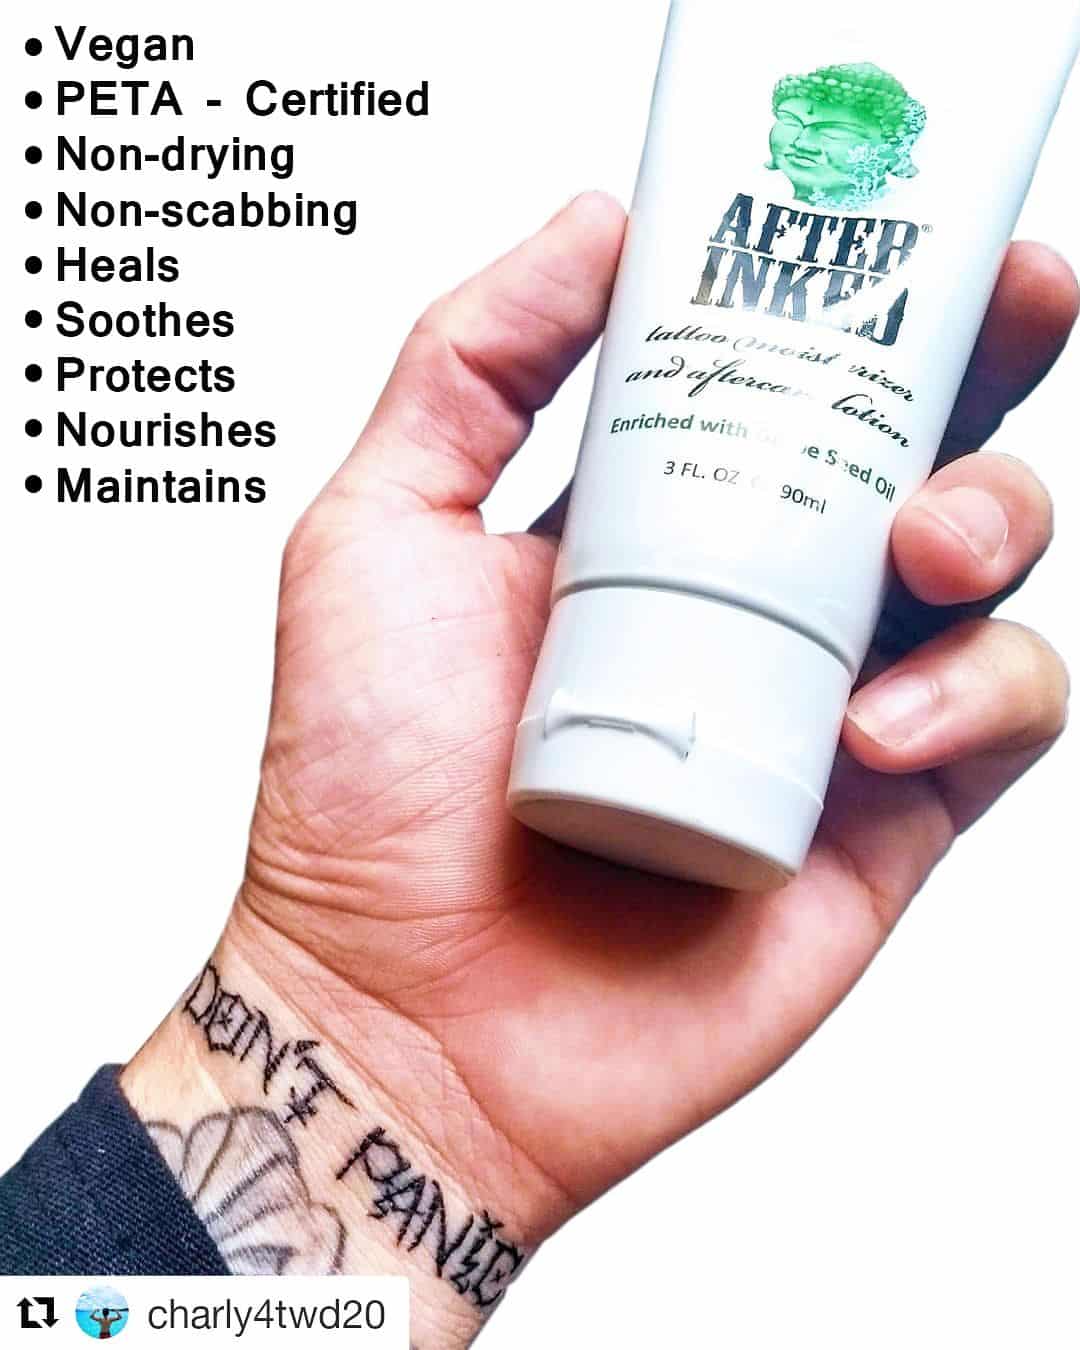 After Inked Tattoo After Care Lotion 90ml Tube